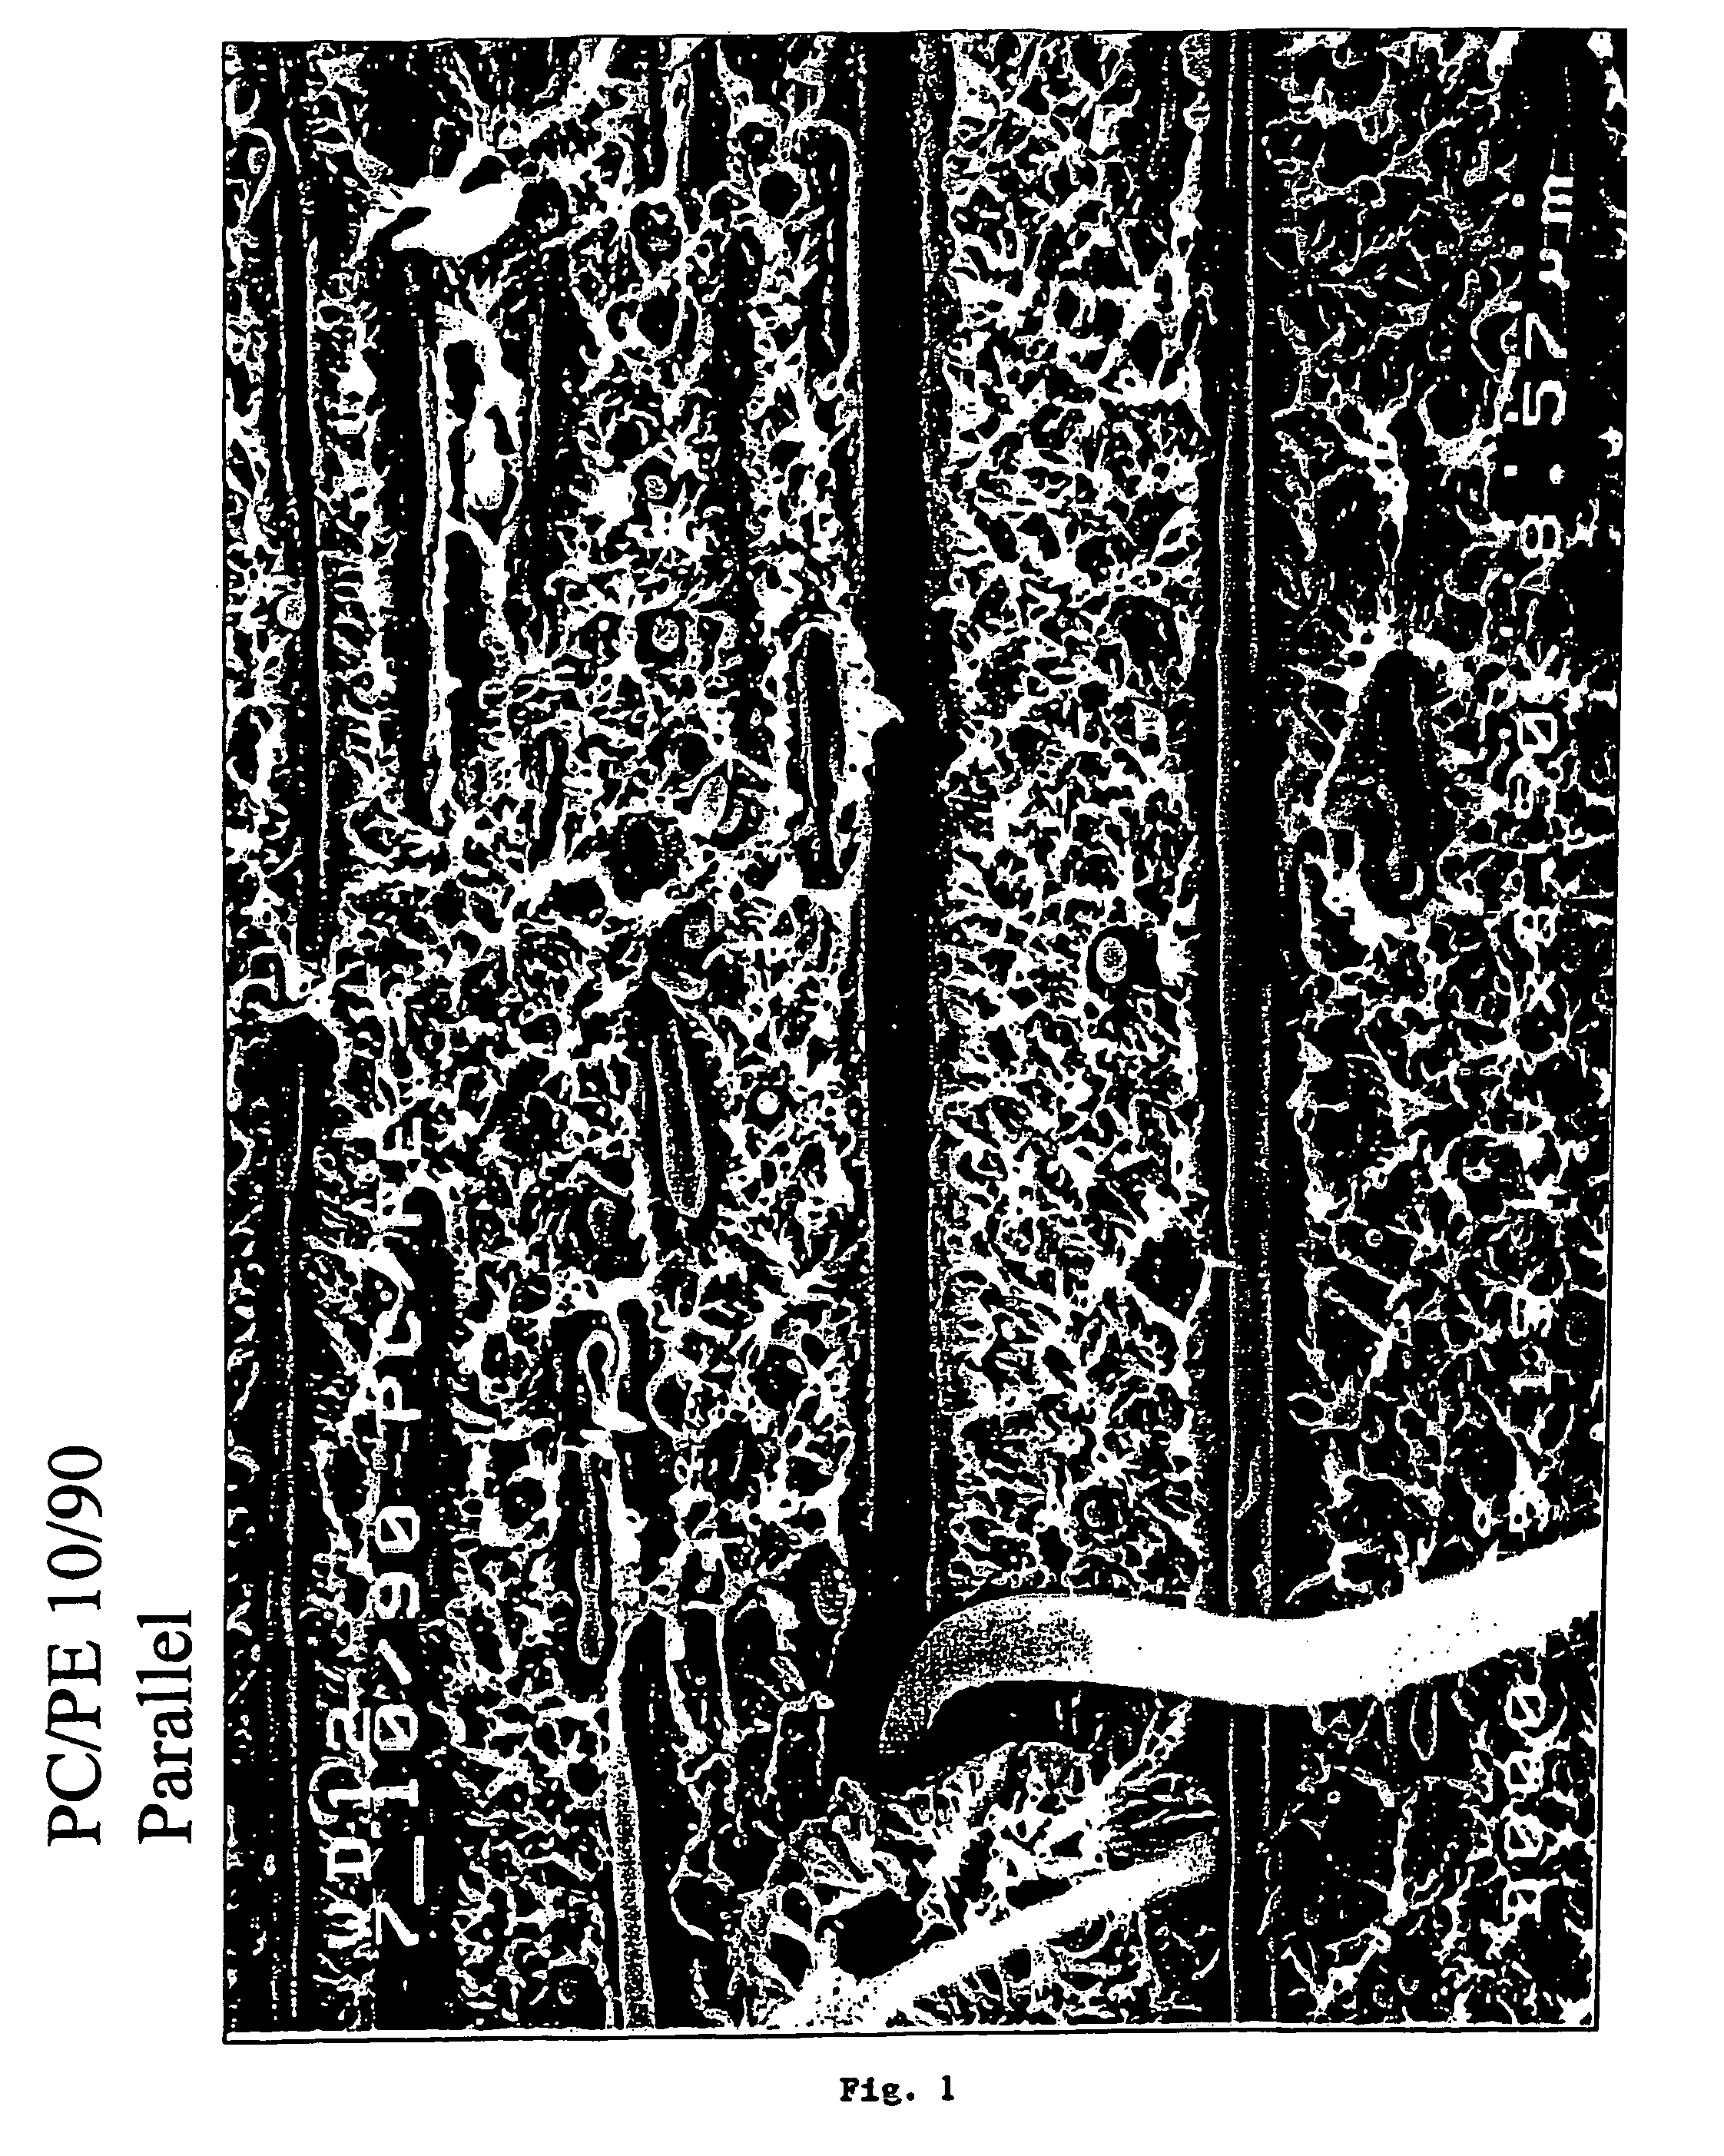 Compositions and methods of making plastic articles